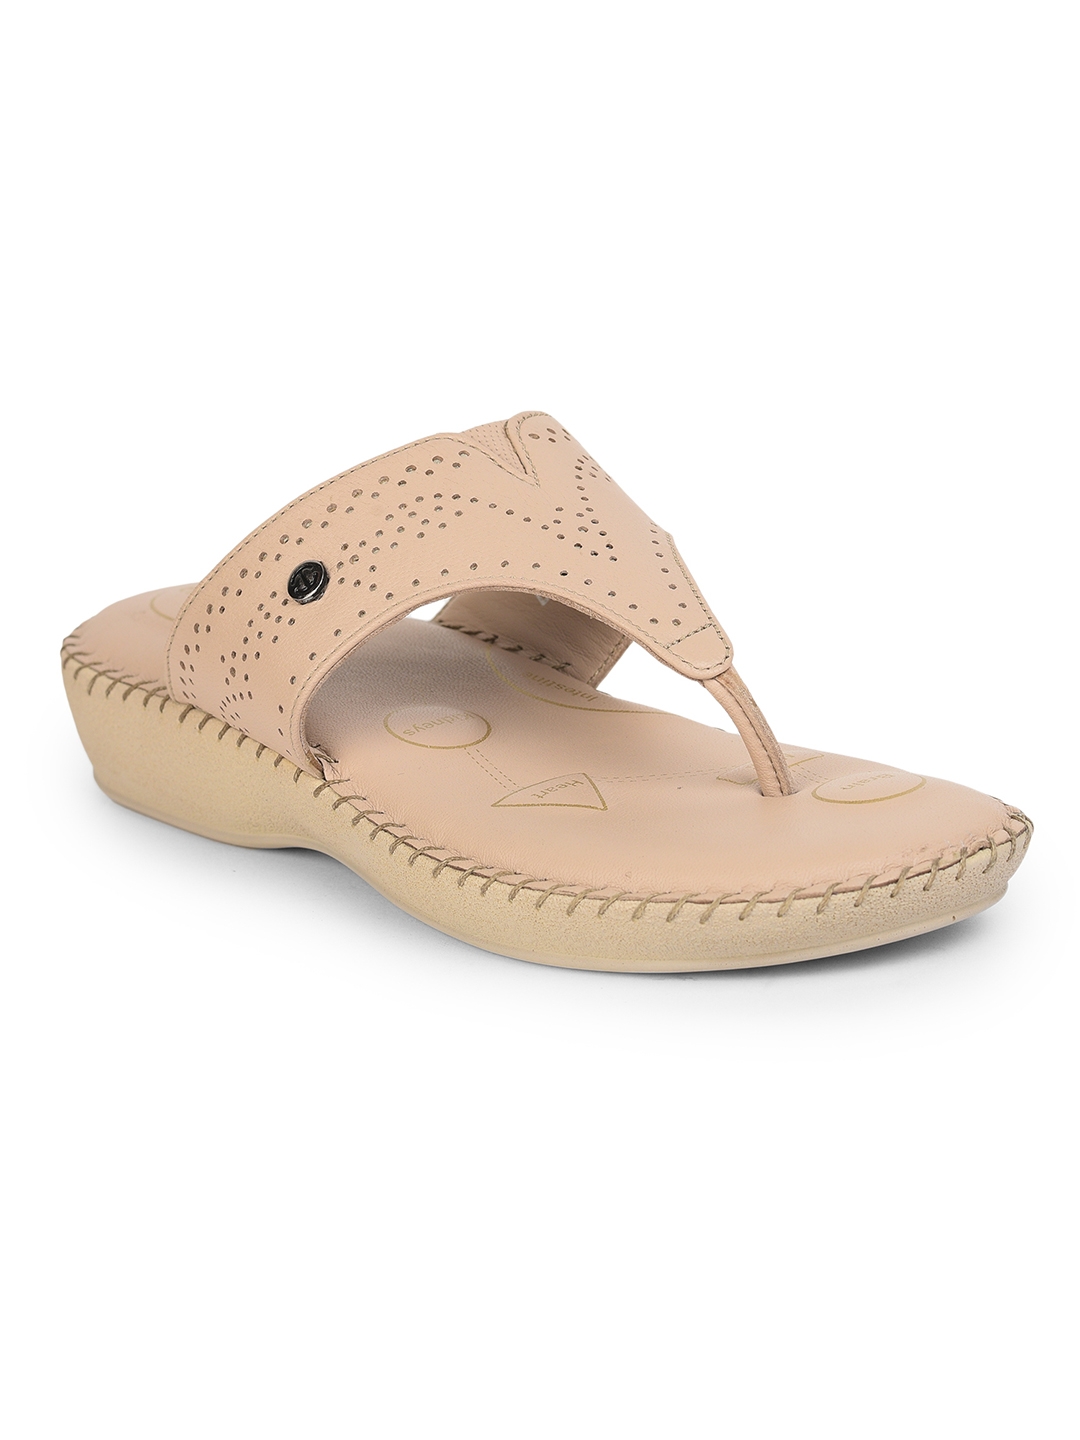 Liberty | Healers by Liberty White Flip Flops DR-0593 For :- Women